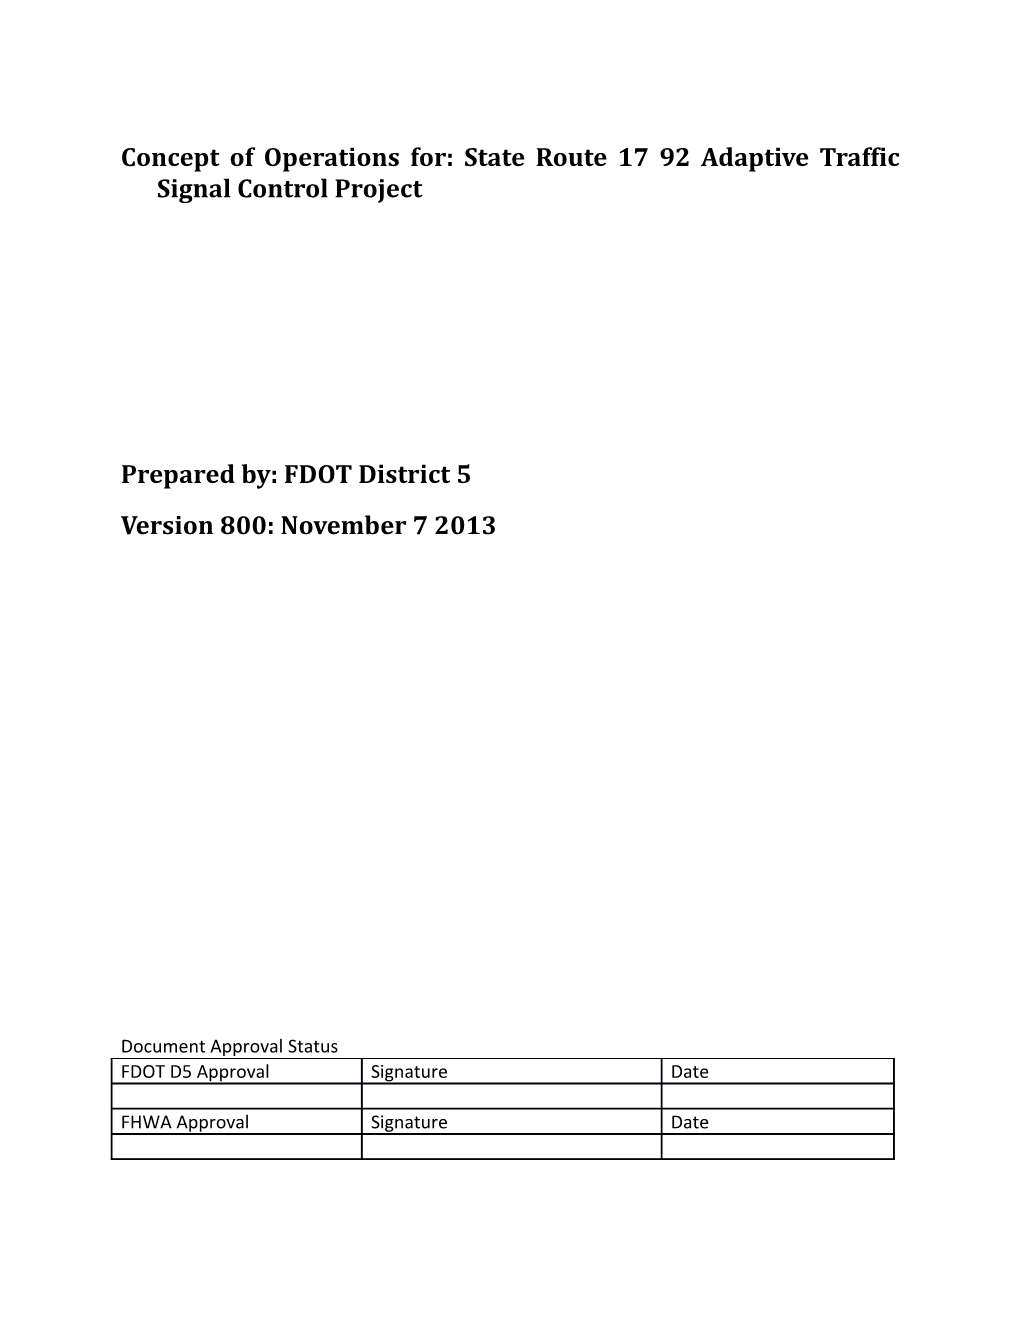 Concept of Operations For: State Route 17 92 Adaptive Traffic Signal Control Project